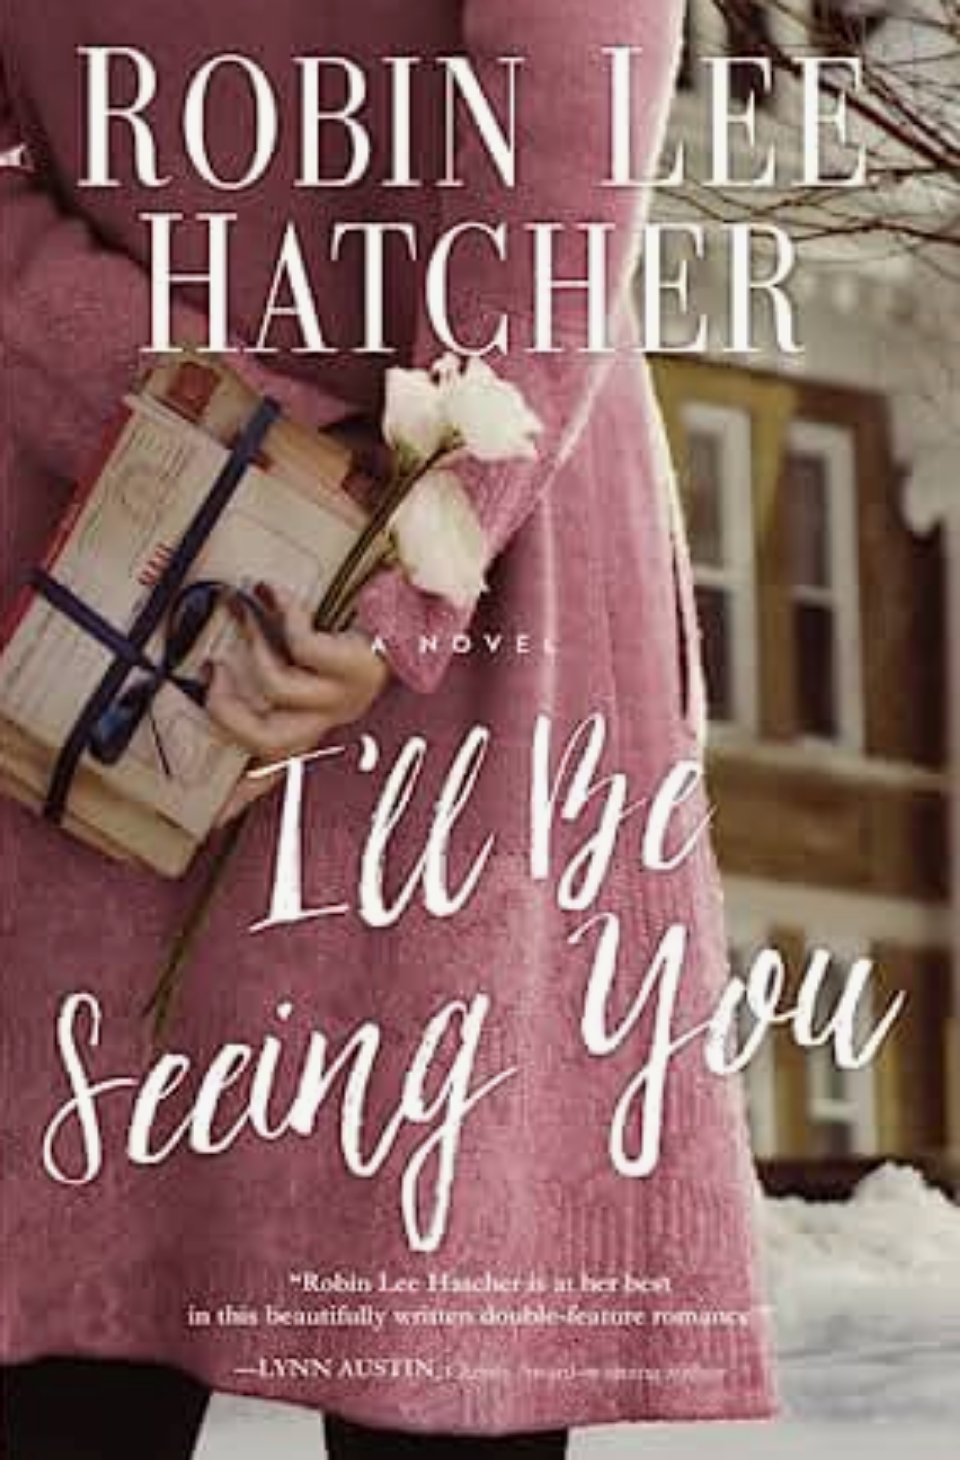 Congrats to Marilyn Turk who won I'll Be Seeing You by Robin Lee Hatcher